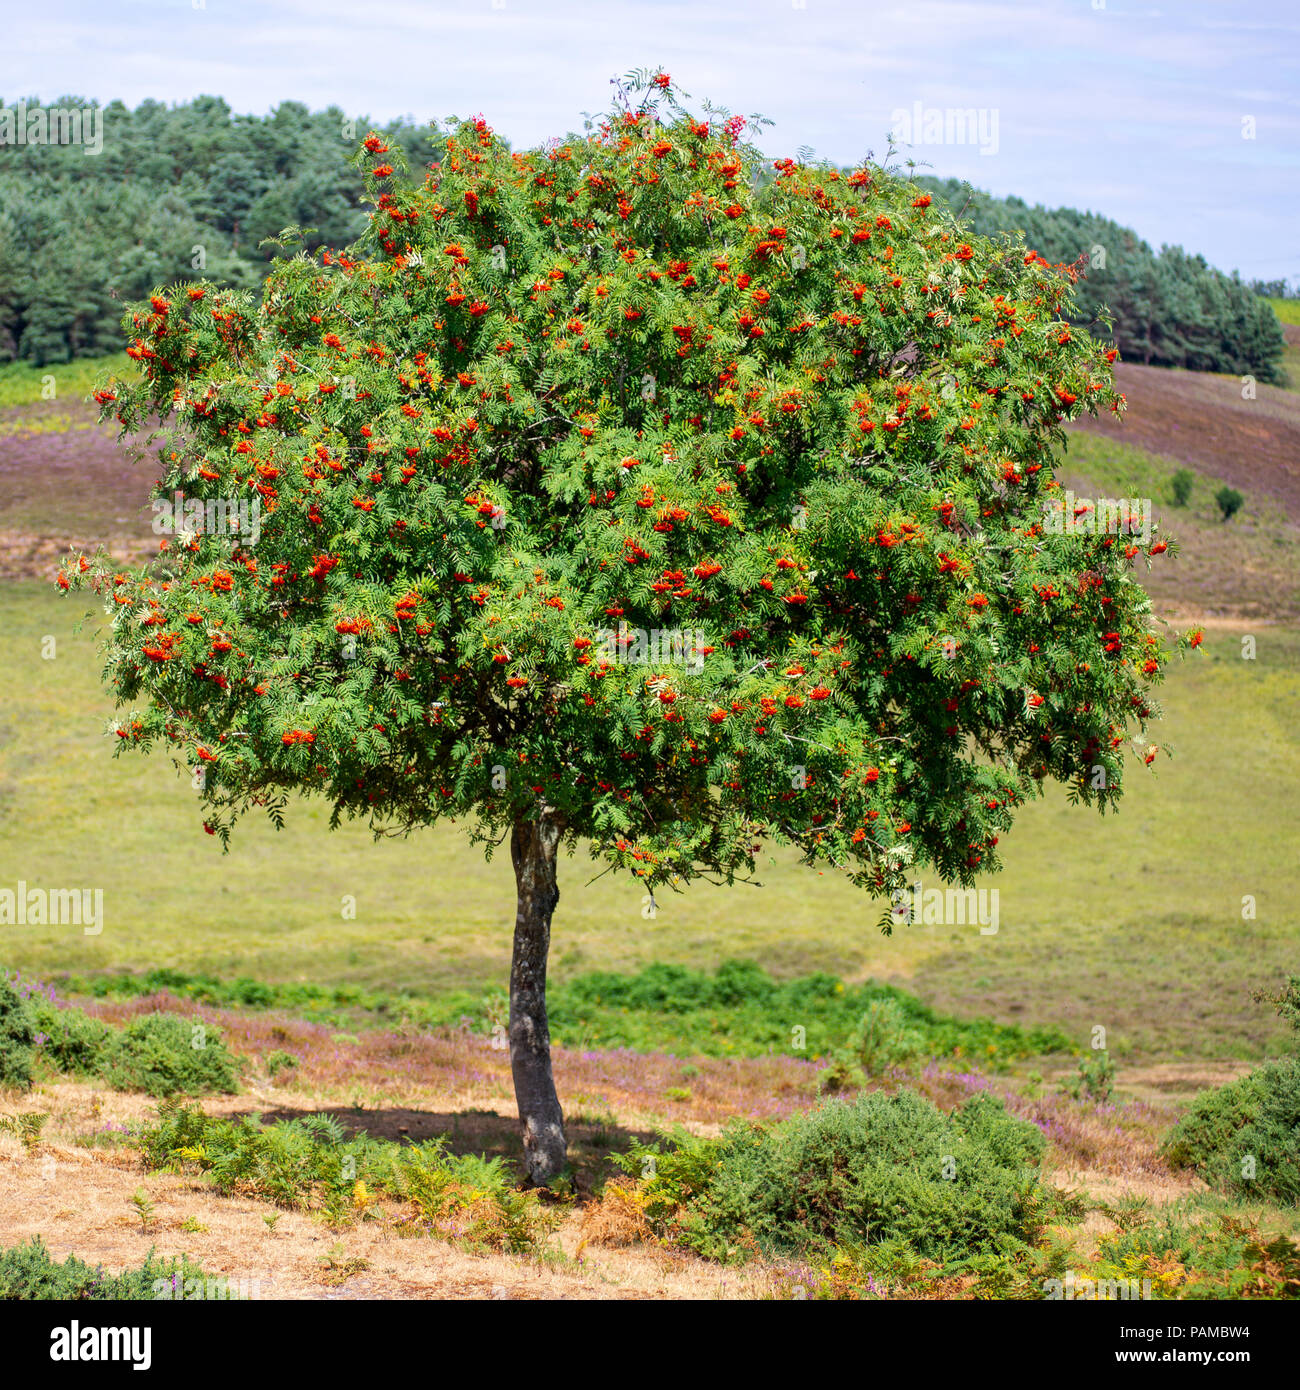 Rowan, or Mountain Ash, tree (rowan, Sorbus aucuparia) with red berries in the New Forest, Hampshire, countryside in July Stock Photo